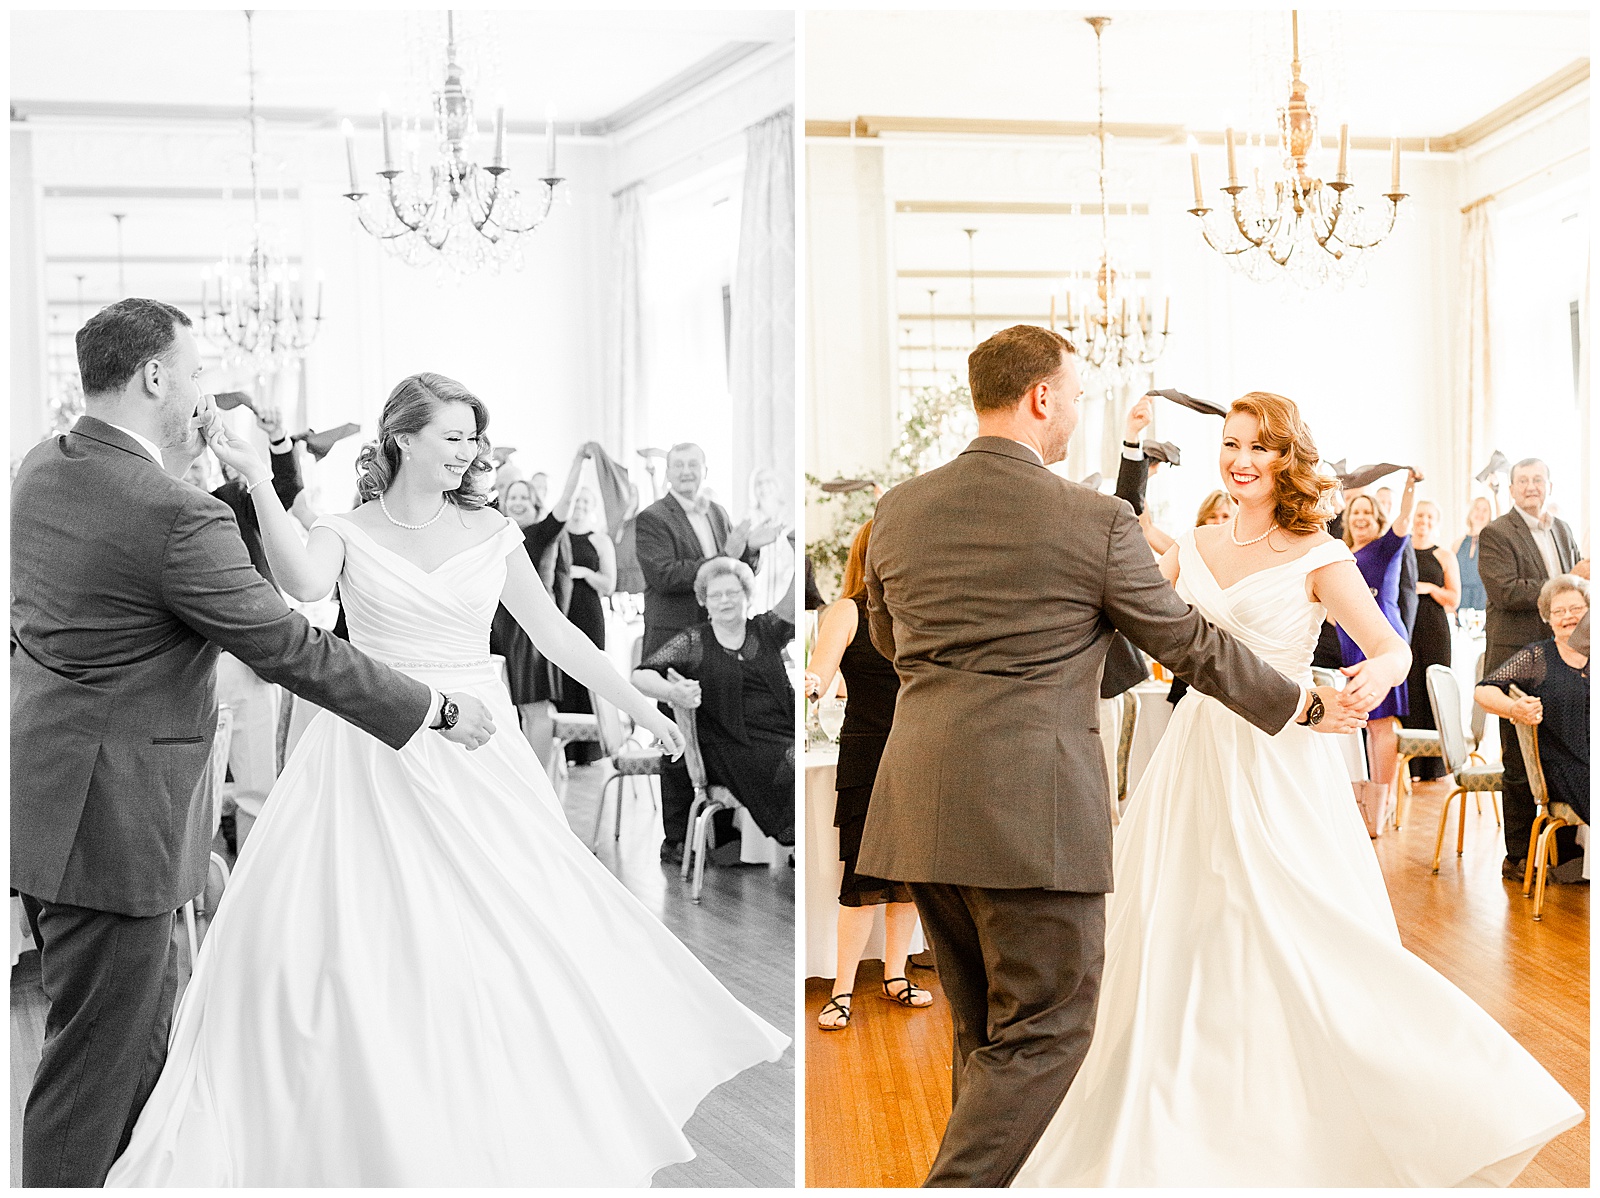 Gorgeous Red-Haired Bride and Groom’s First Dance at elegant indoor floral venue in 1940s Modern Vintage Wedding in Charlotte, NC | check out the full wedding at KevynDixonPhoto.com